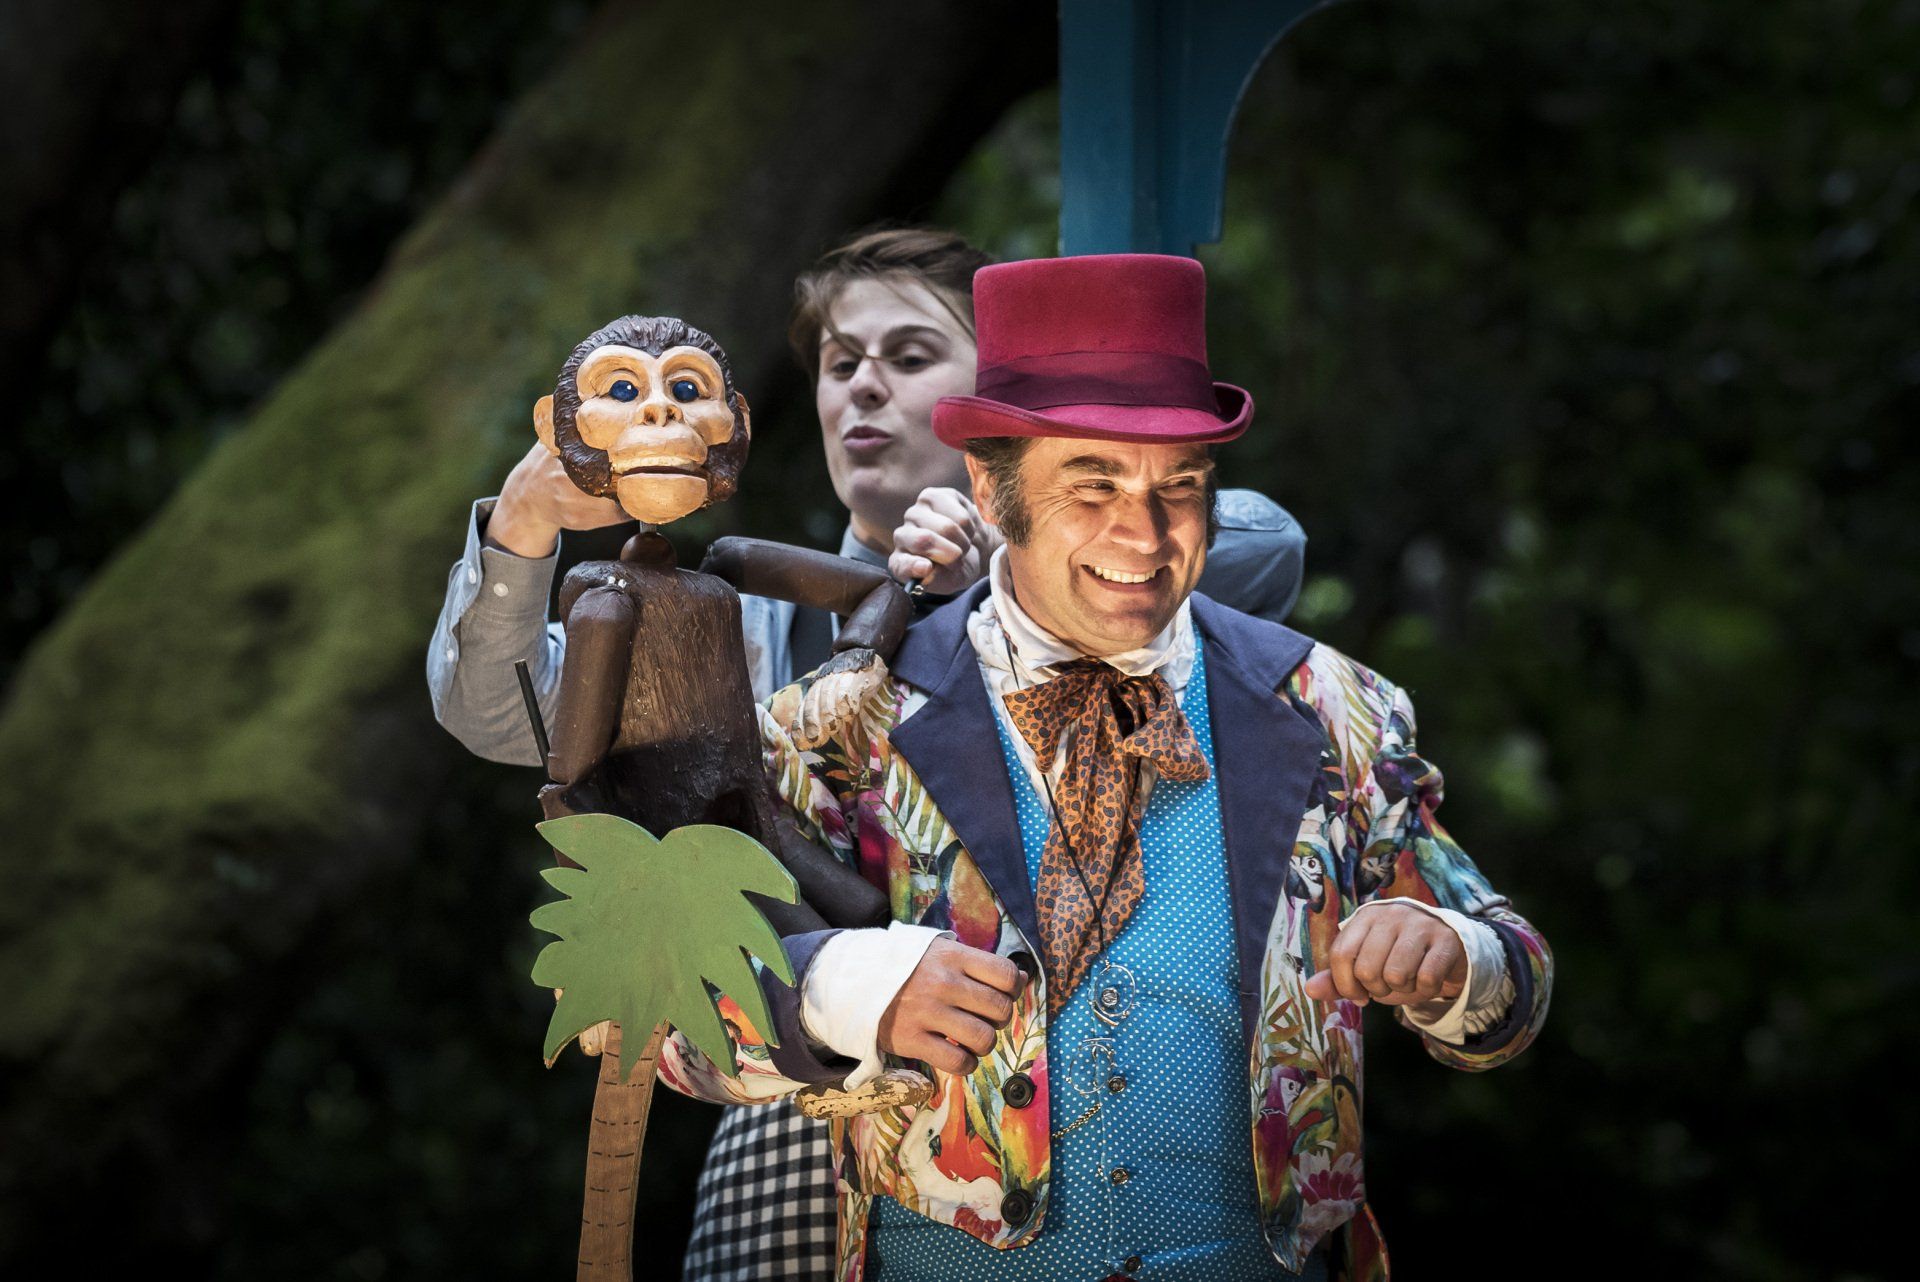 A man in a top hat is holding a monkey puppet.